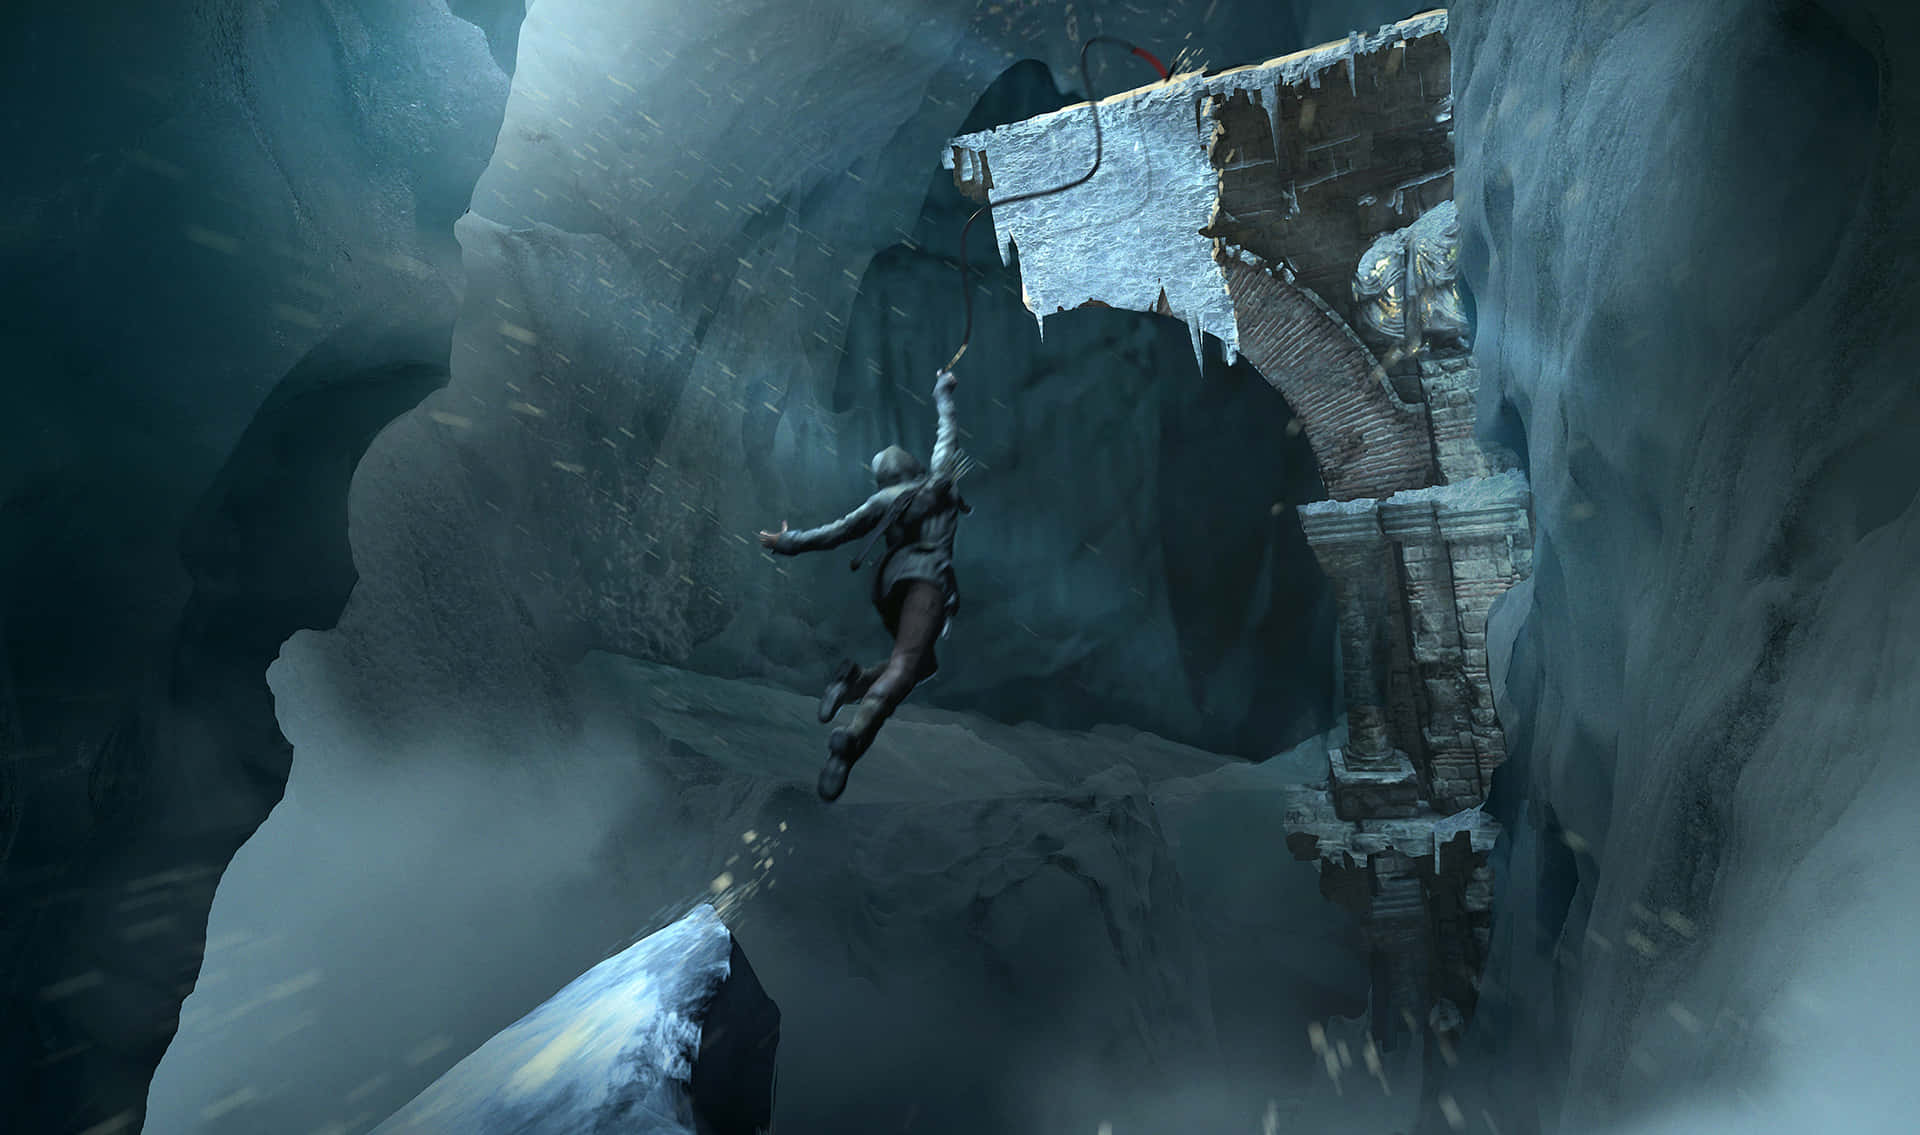 Get in the thrilling adventure of Rise of the Tomb Raider